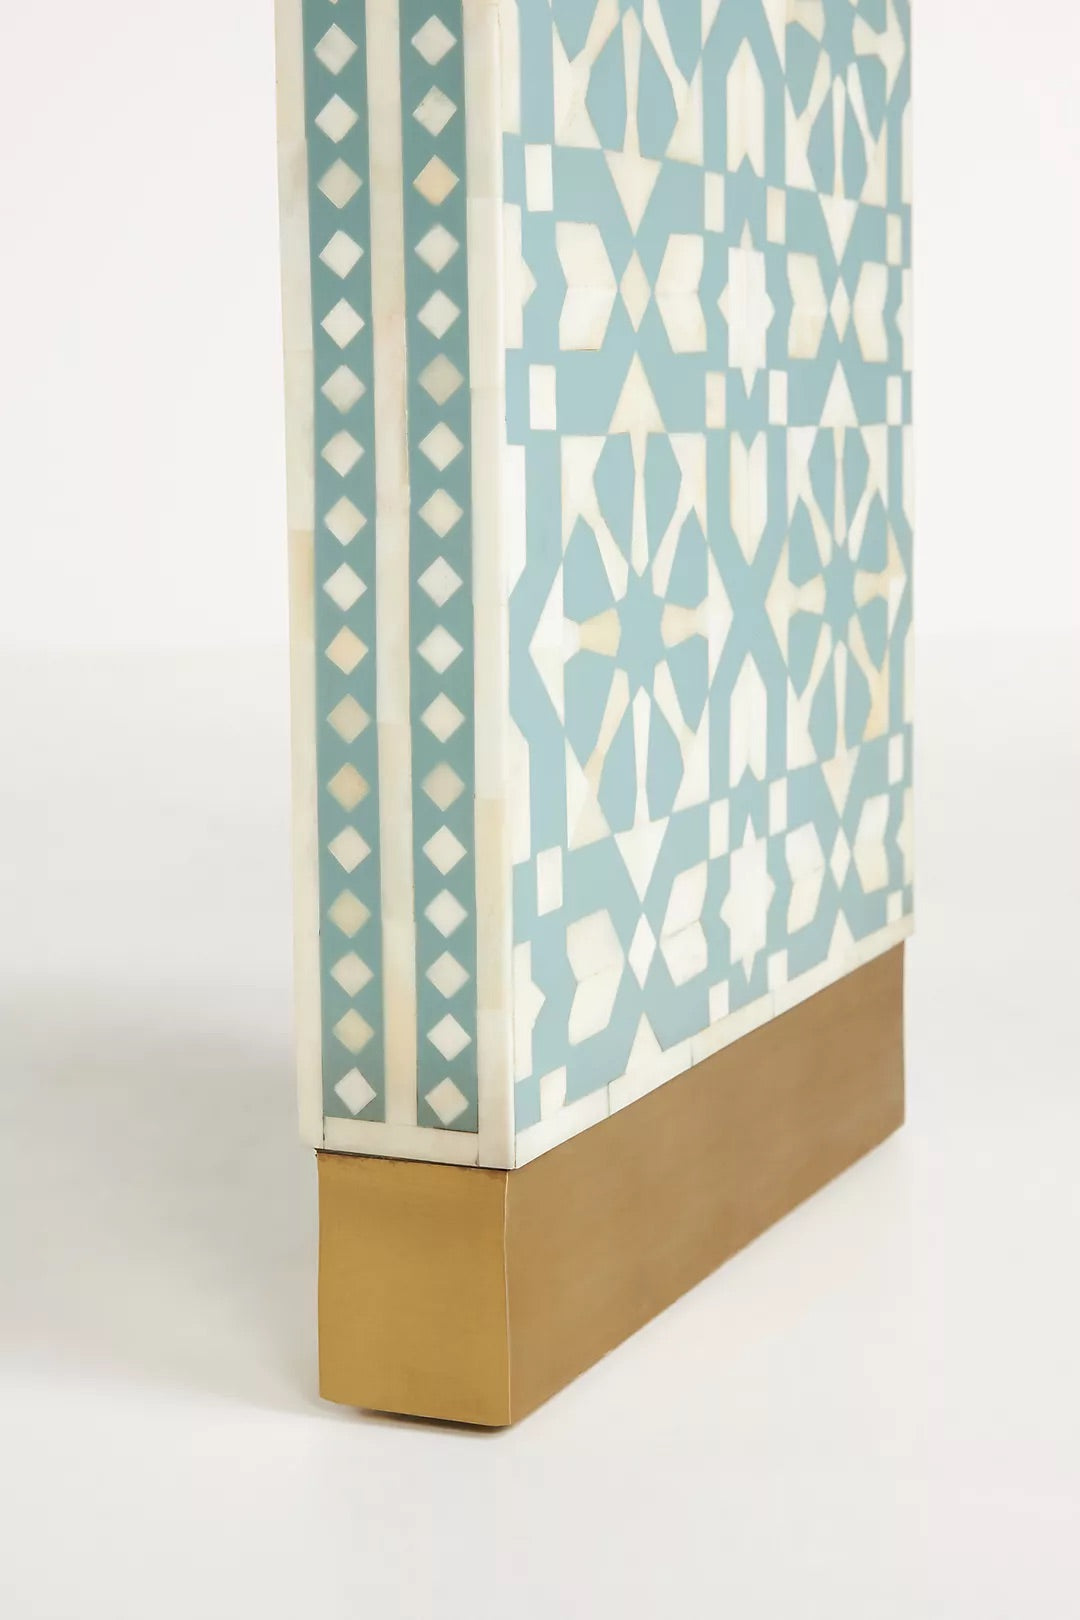 Moroccan Bliss Console